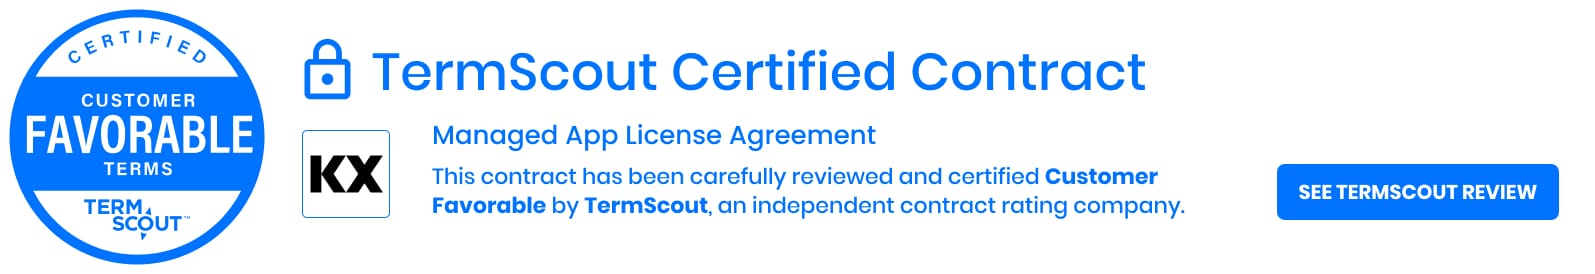 TermScout Certified Contract - Managed App License Agreement